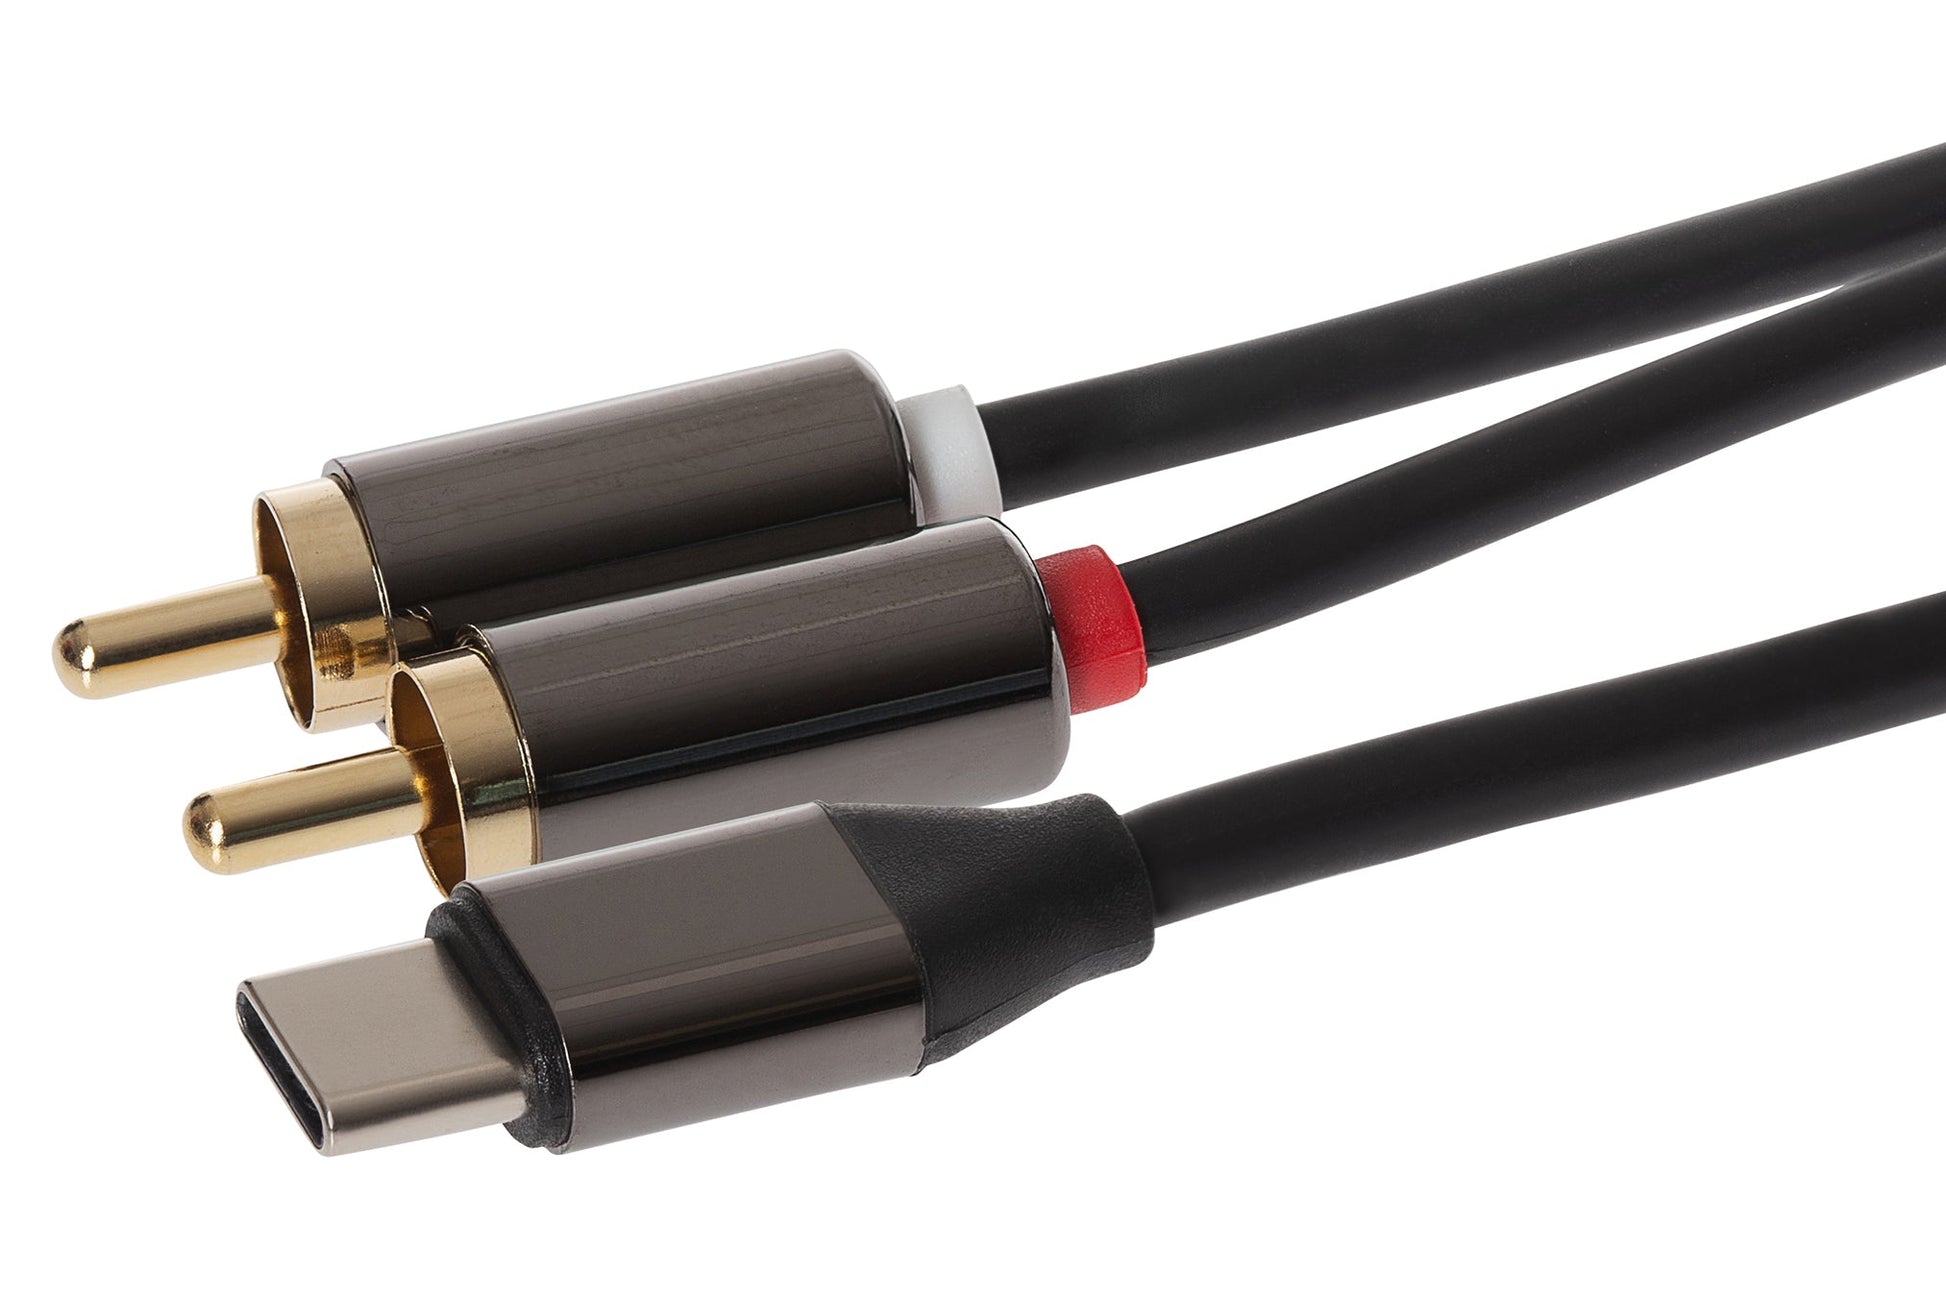 2m Jack to 3 RCA Cable - Audio Video (Camera Cable)